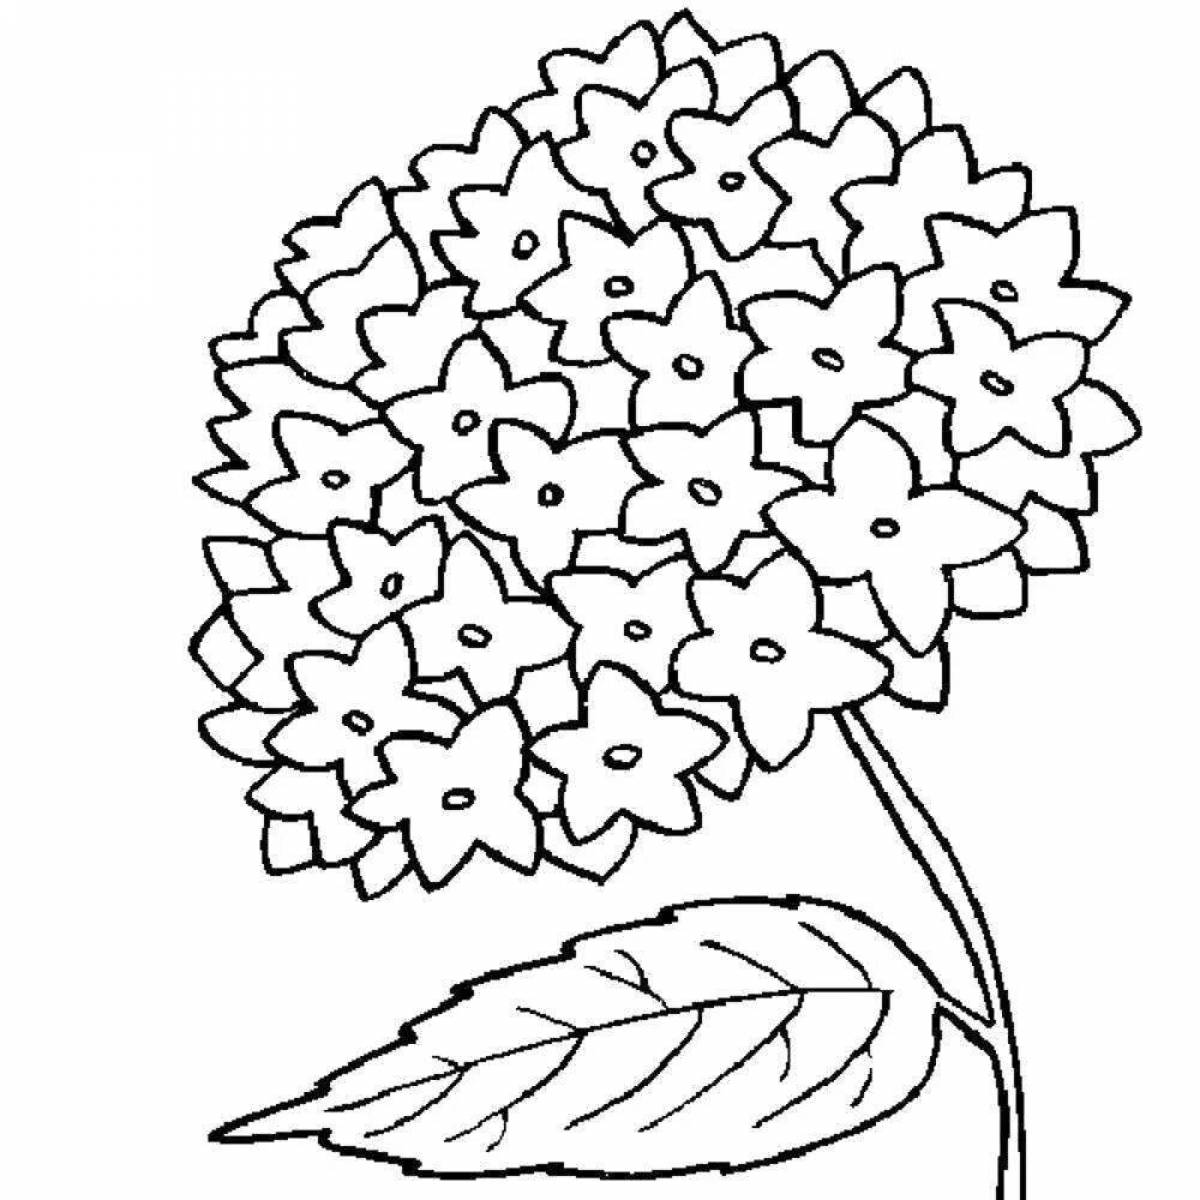 Adorable flower coloring book for kids 5-6 years old